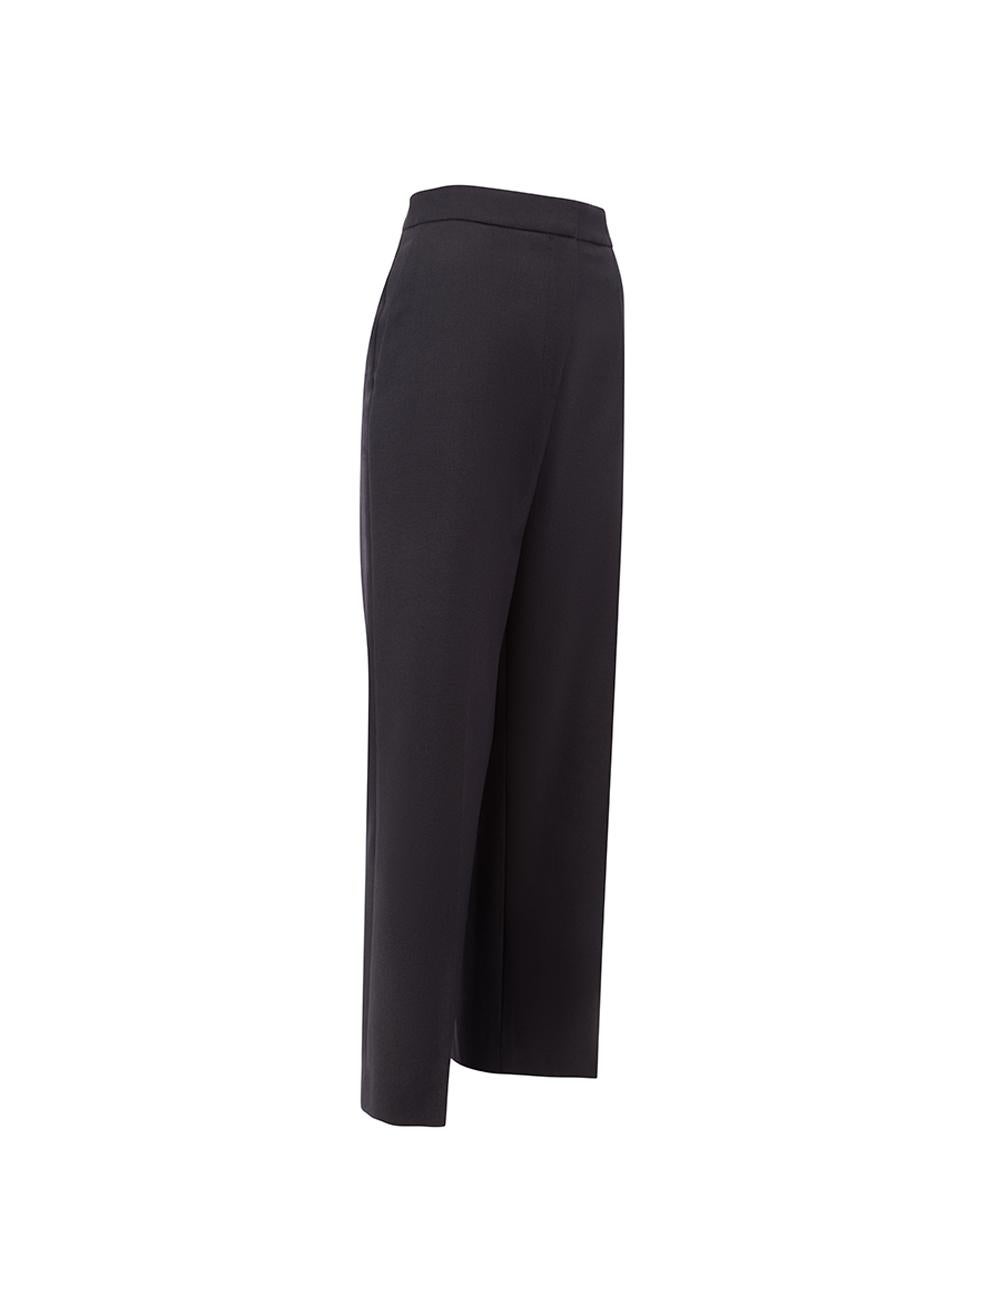 CONDITION is Very good. Hardly any visible wear to trousers is evident on this used Alaïa designer resale item. 
 
 Details
  Navy
 Wool
 Straight leg trousers
 High rise
 Front zip closure with clasp
 Front side pockets
 Back welt pockets
 
 
 Made